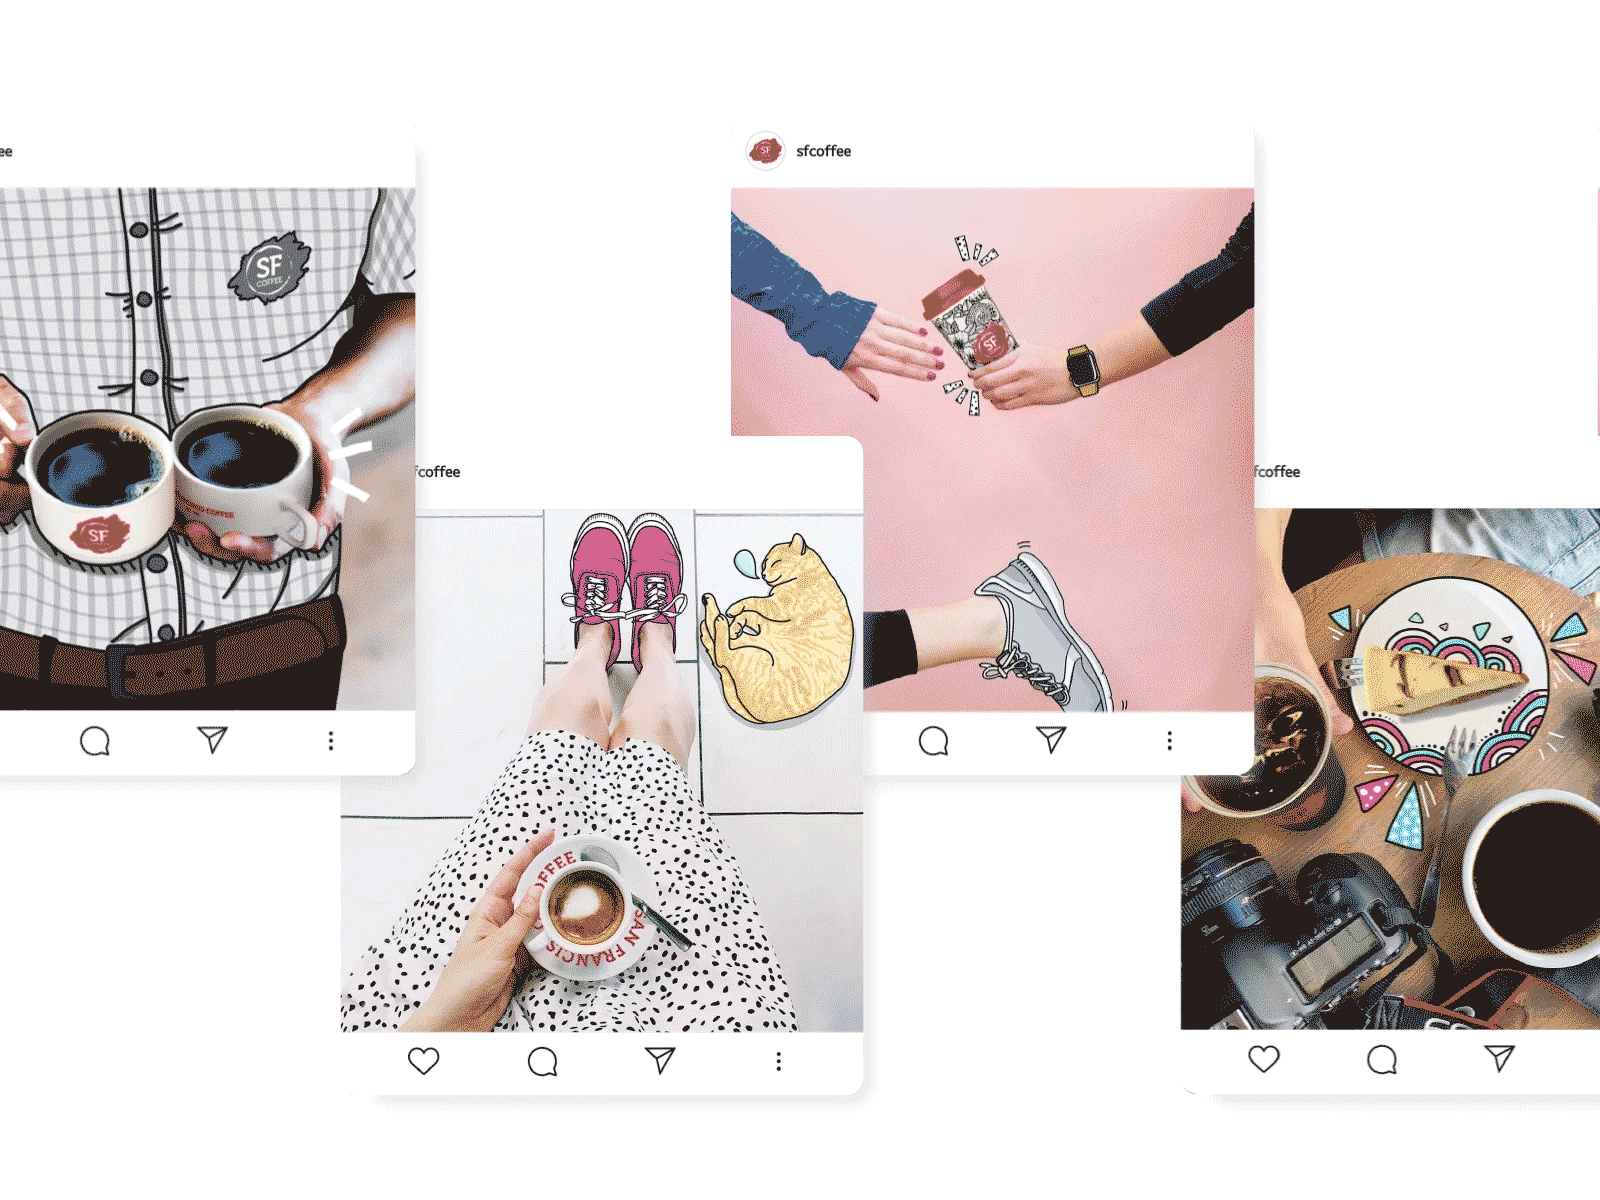 San Francisco Coffee social media management post designs with a mix of real images and doodle like illustration that reflects the brand image